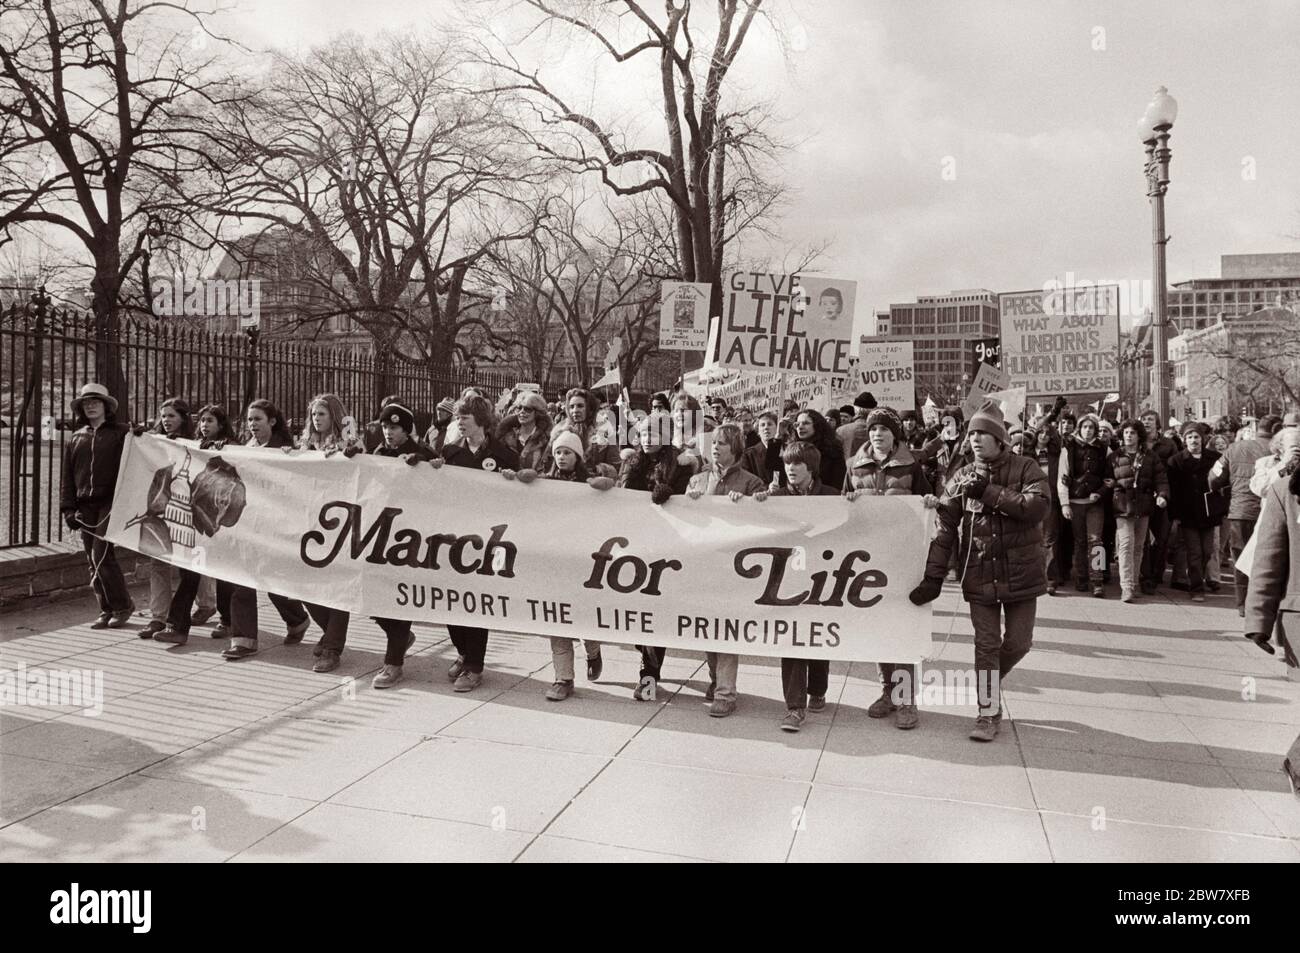 Pro-Life supporters at the White House on January 22, 1979, peacefully demonstrating for the life of unborn humans, and against the government-sanctioned killing of the unborn through abortion. (USA) Stock Photo